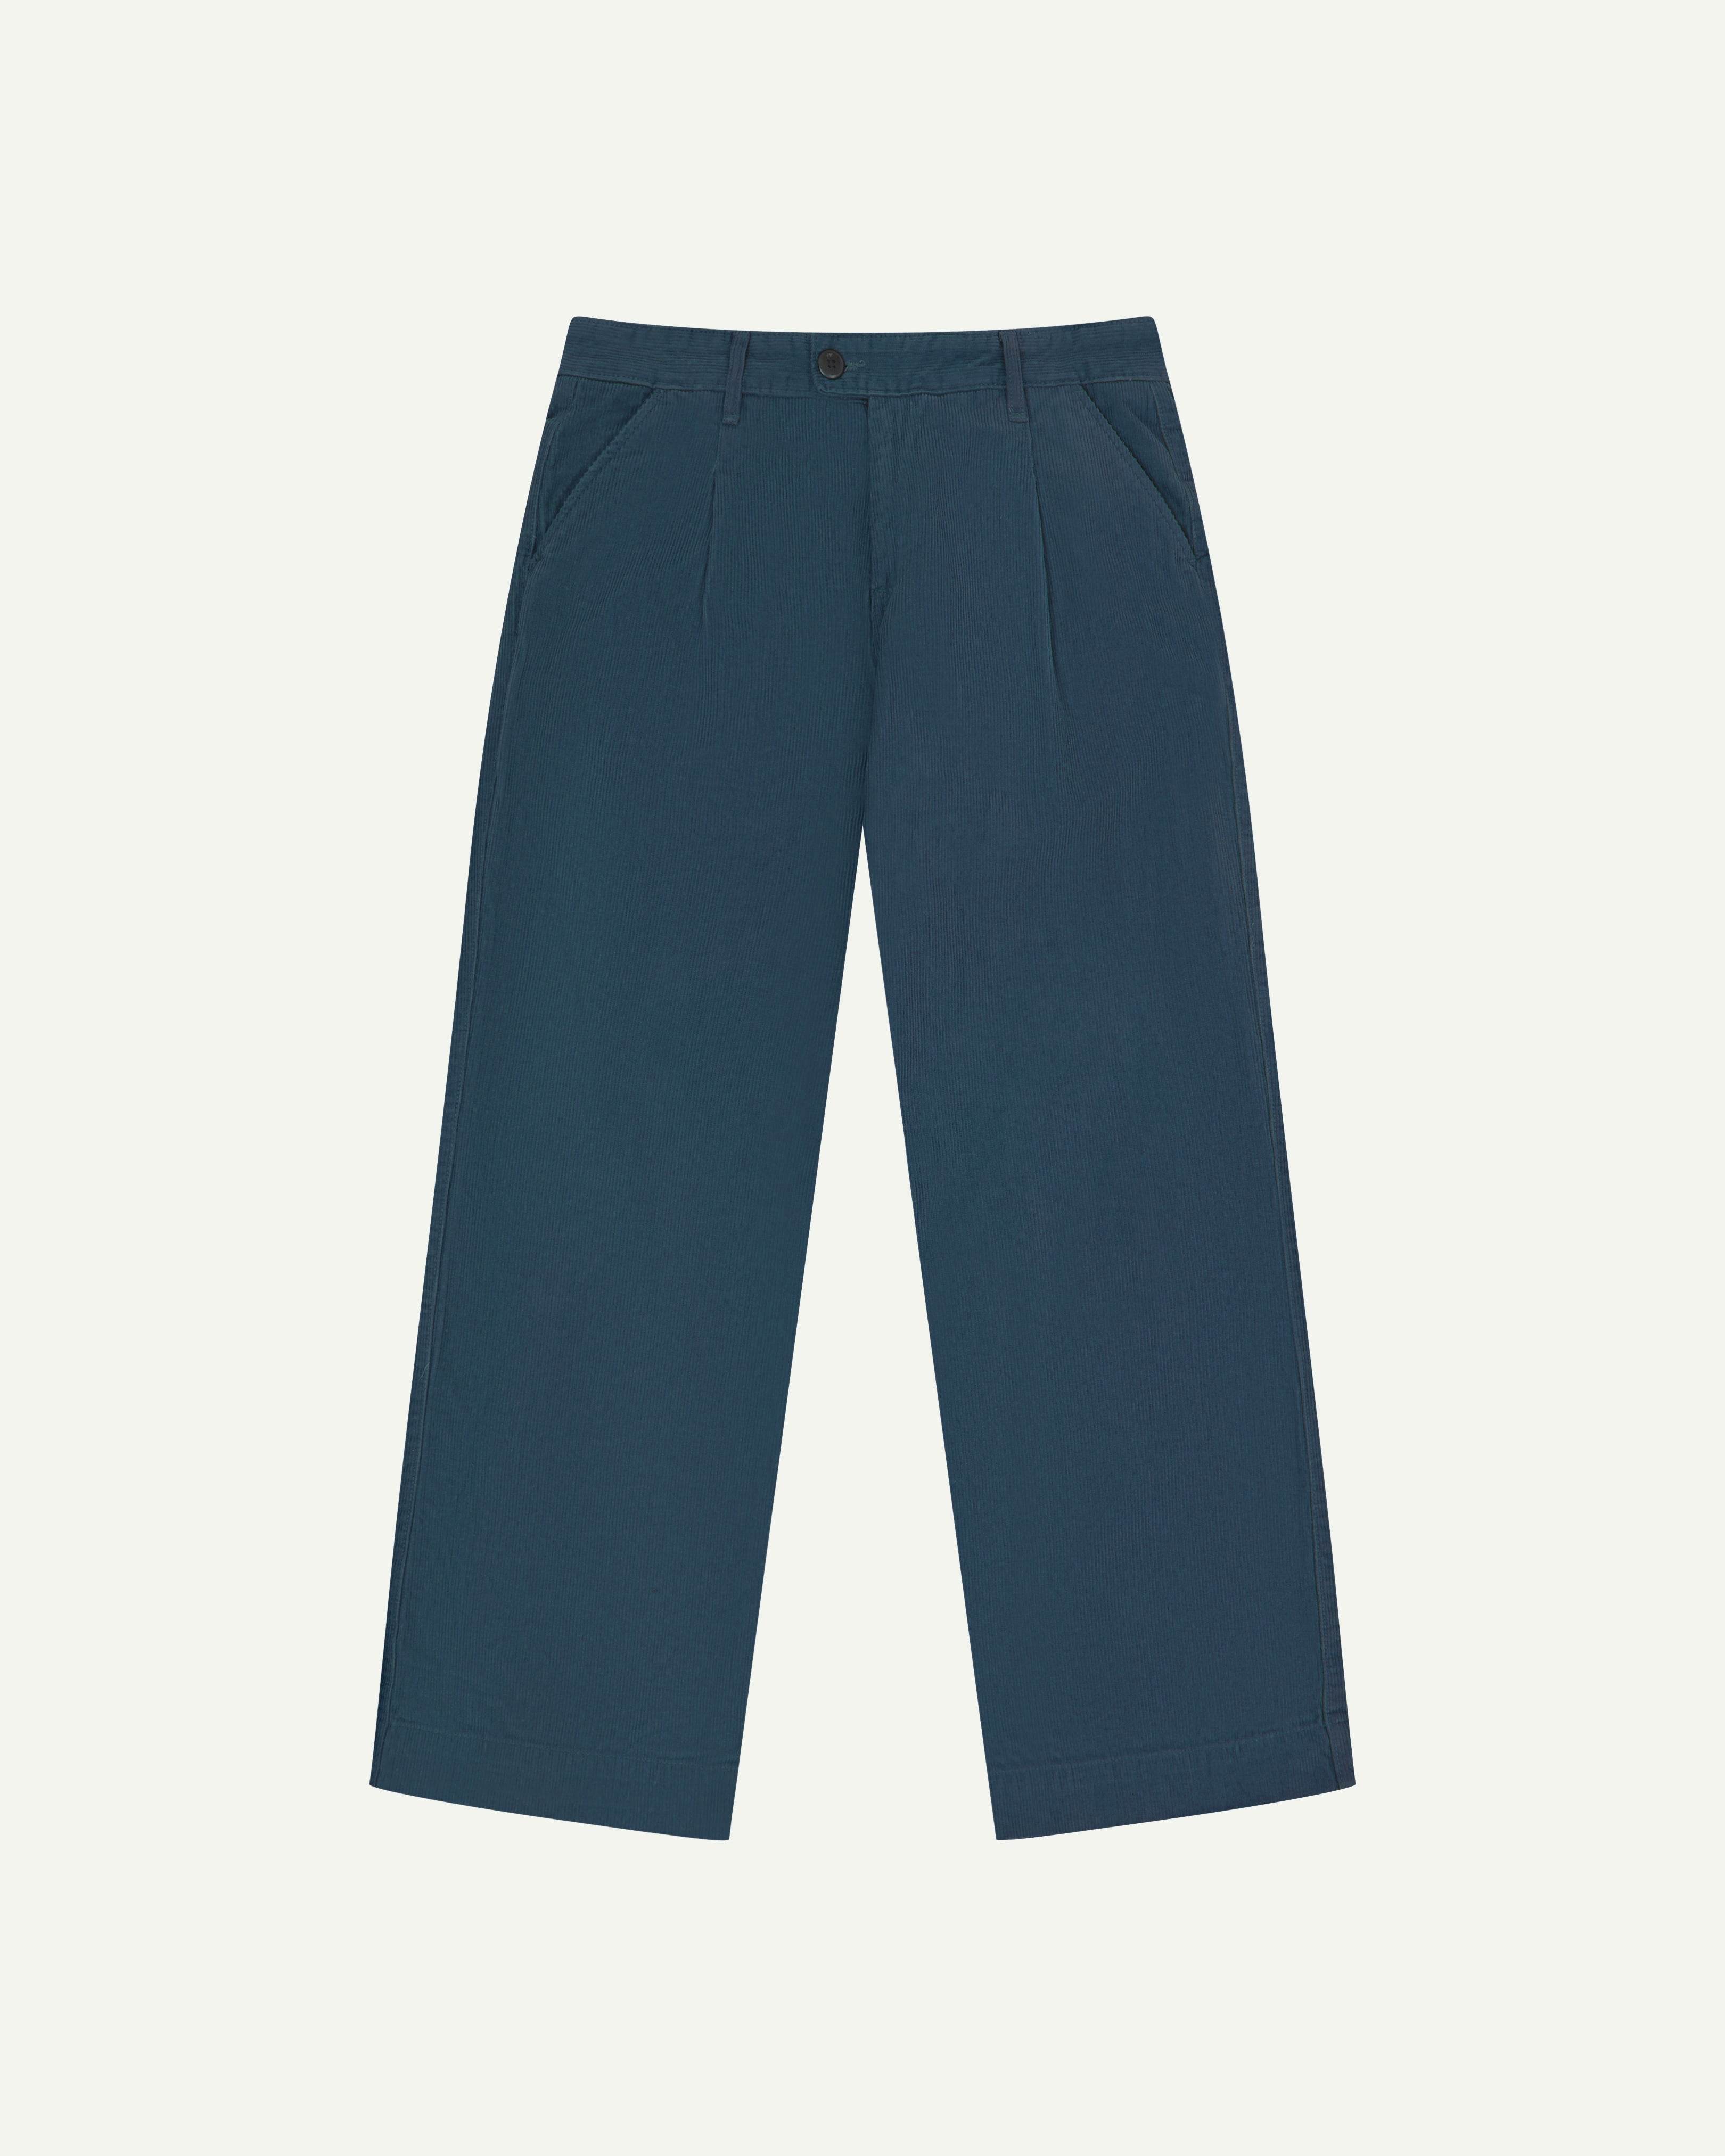 Front flat shot of Uskees cord boat pants in petrol blue.  Showing Corozo button fasteningand wide leg fit.